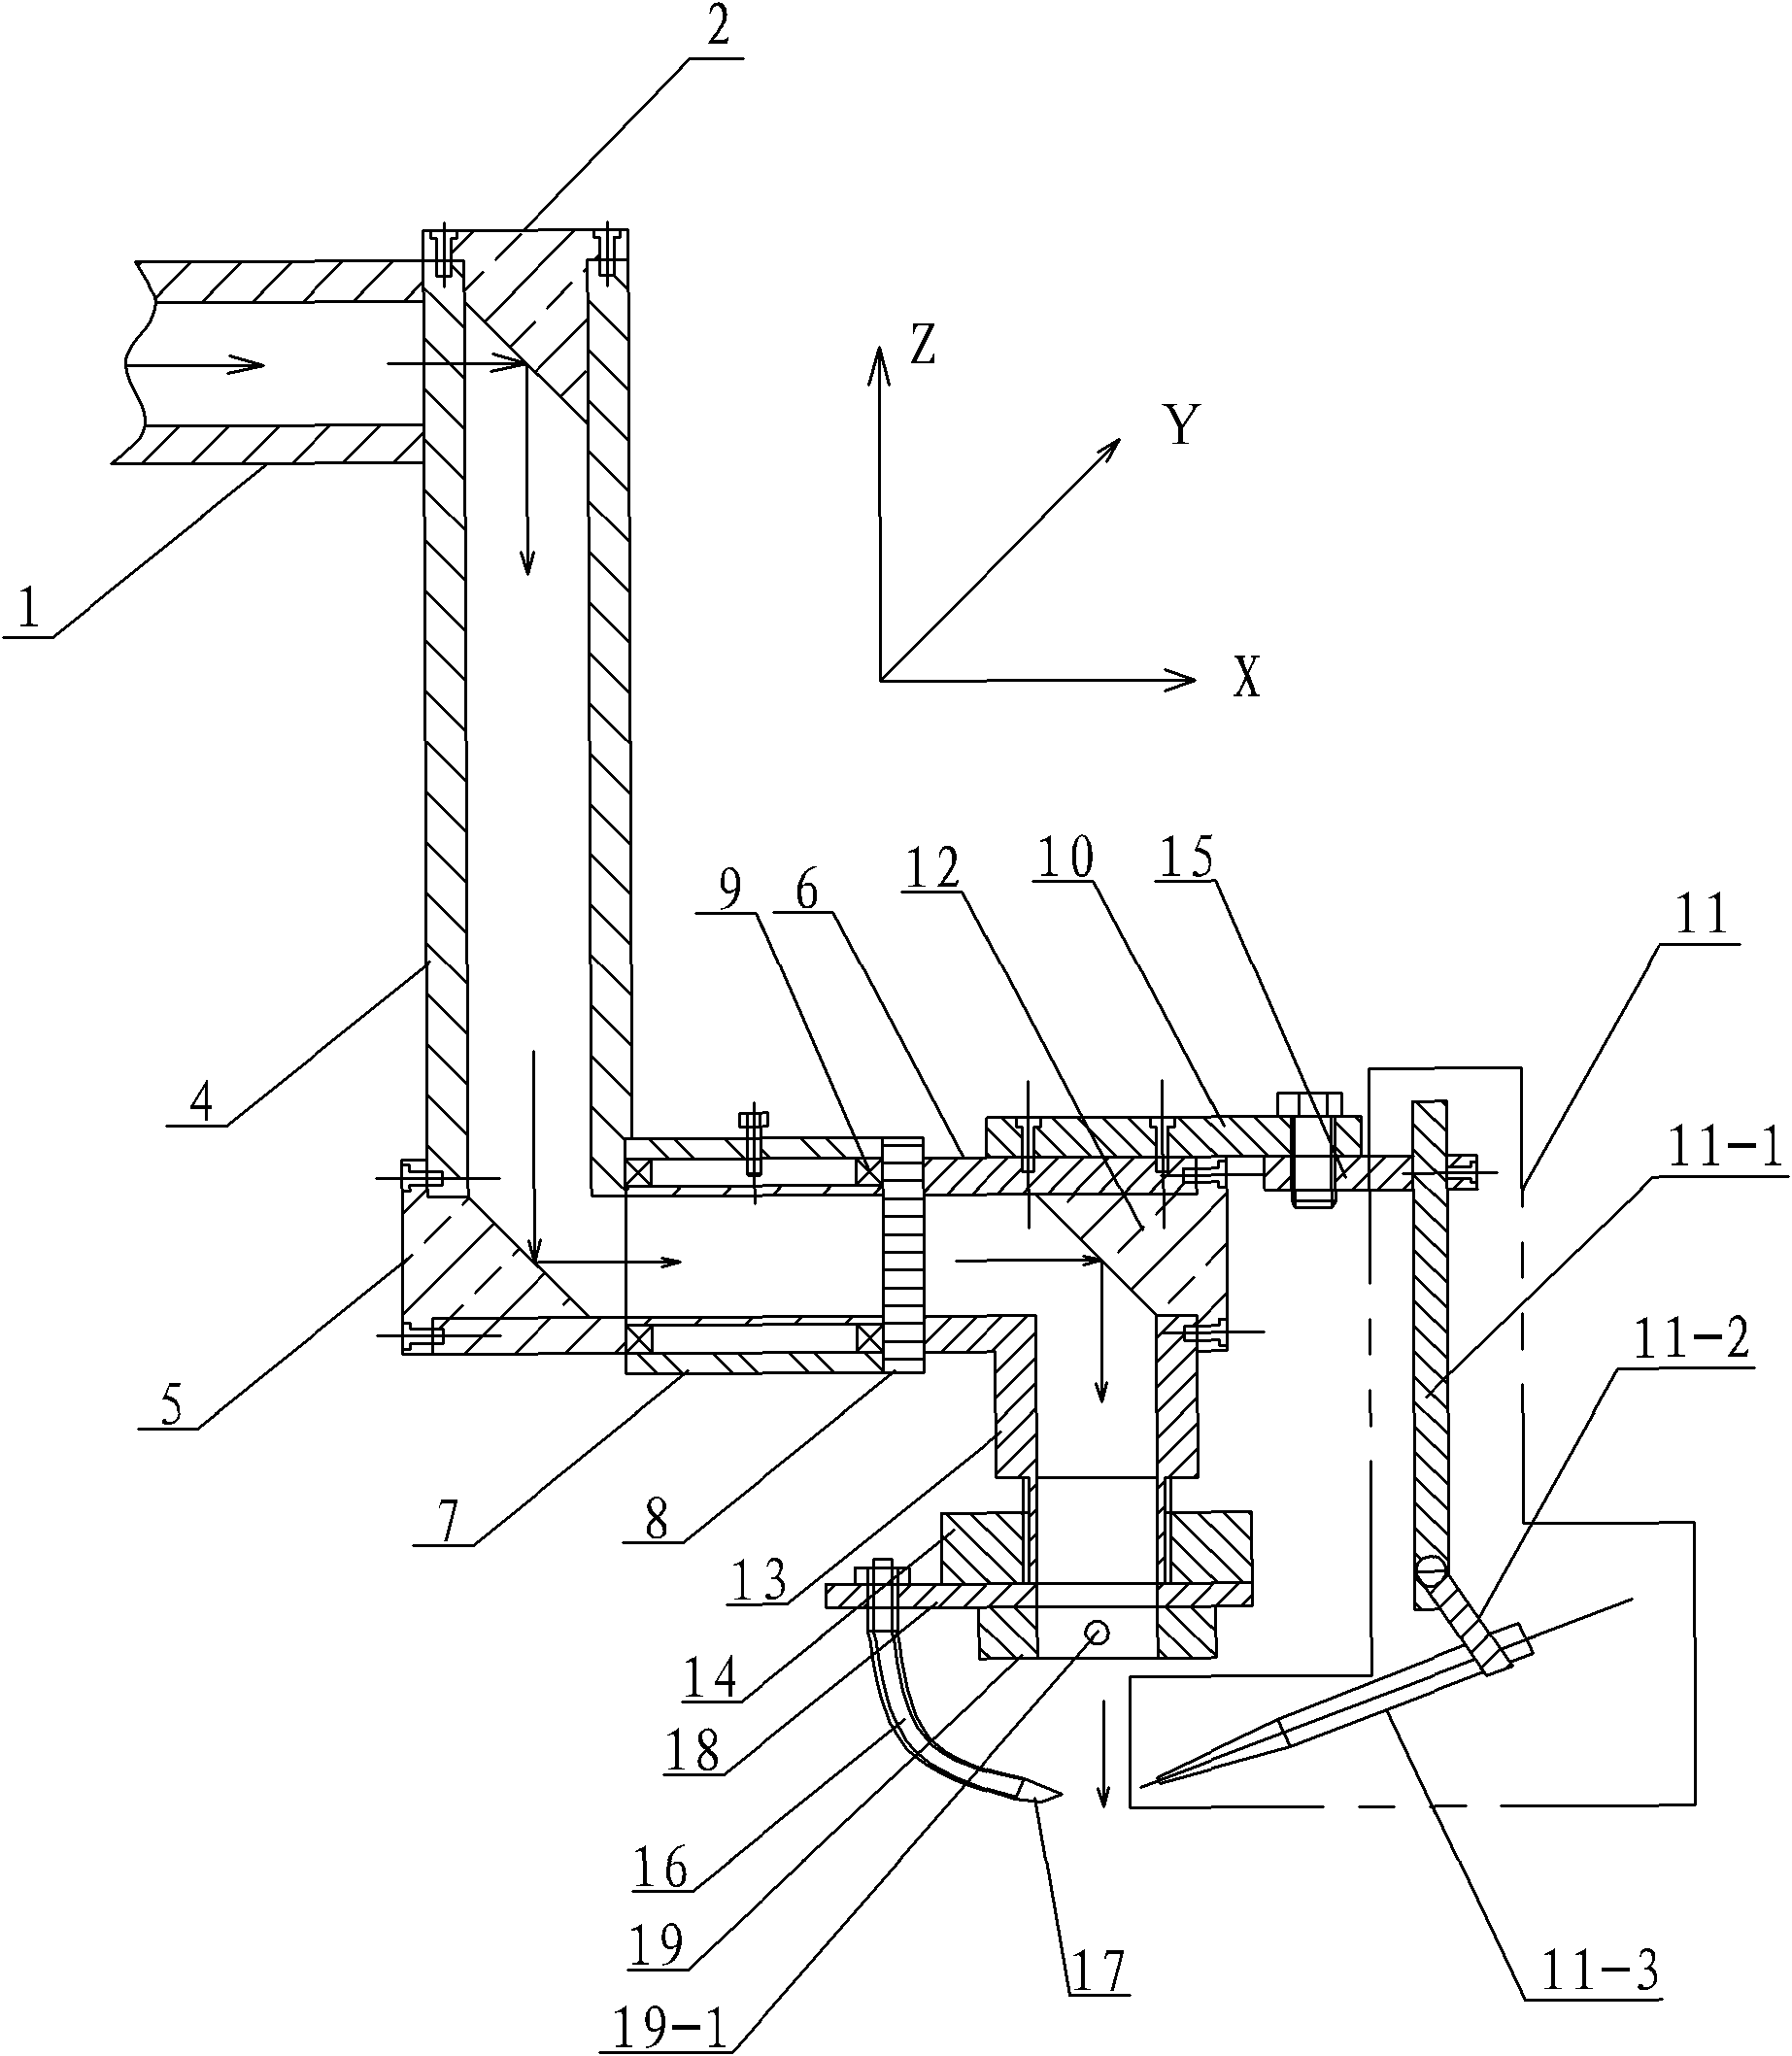 Laser double-side synchronous welding system with skin-skeleton structure